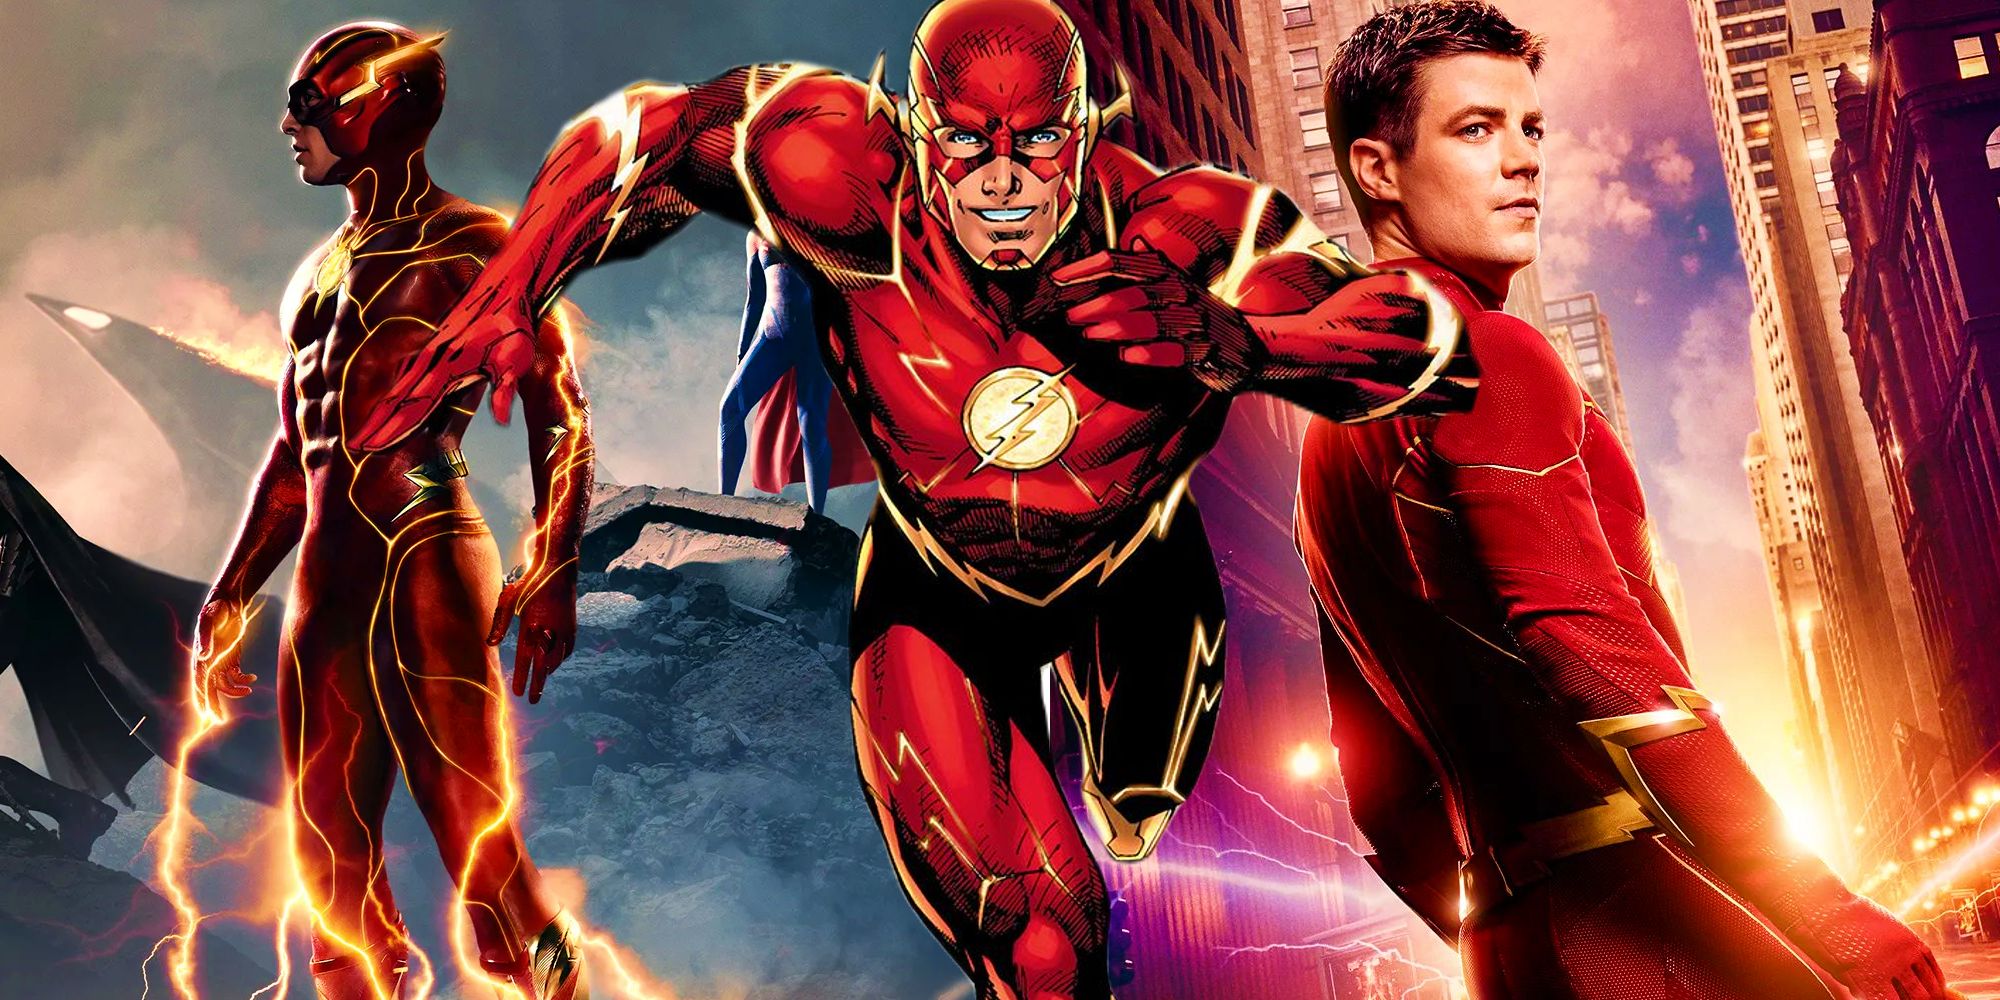 The Flash from DC Comics between the posters for The Flash movie and The Flash CW show